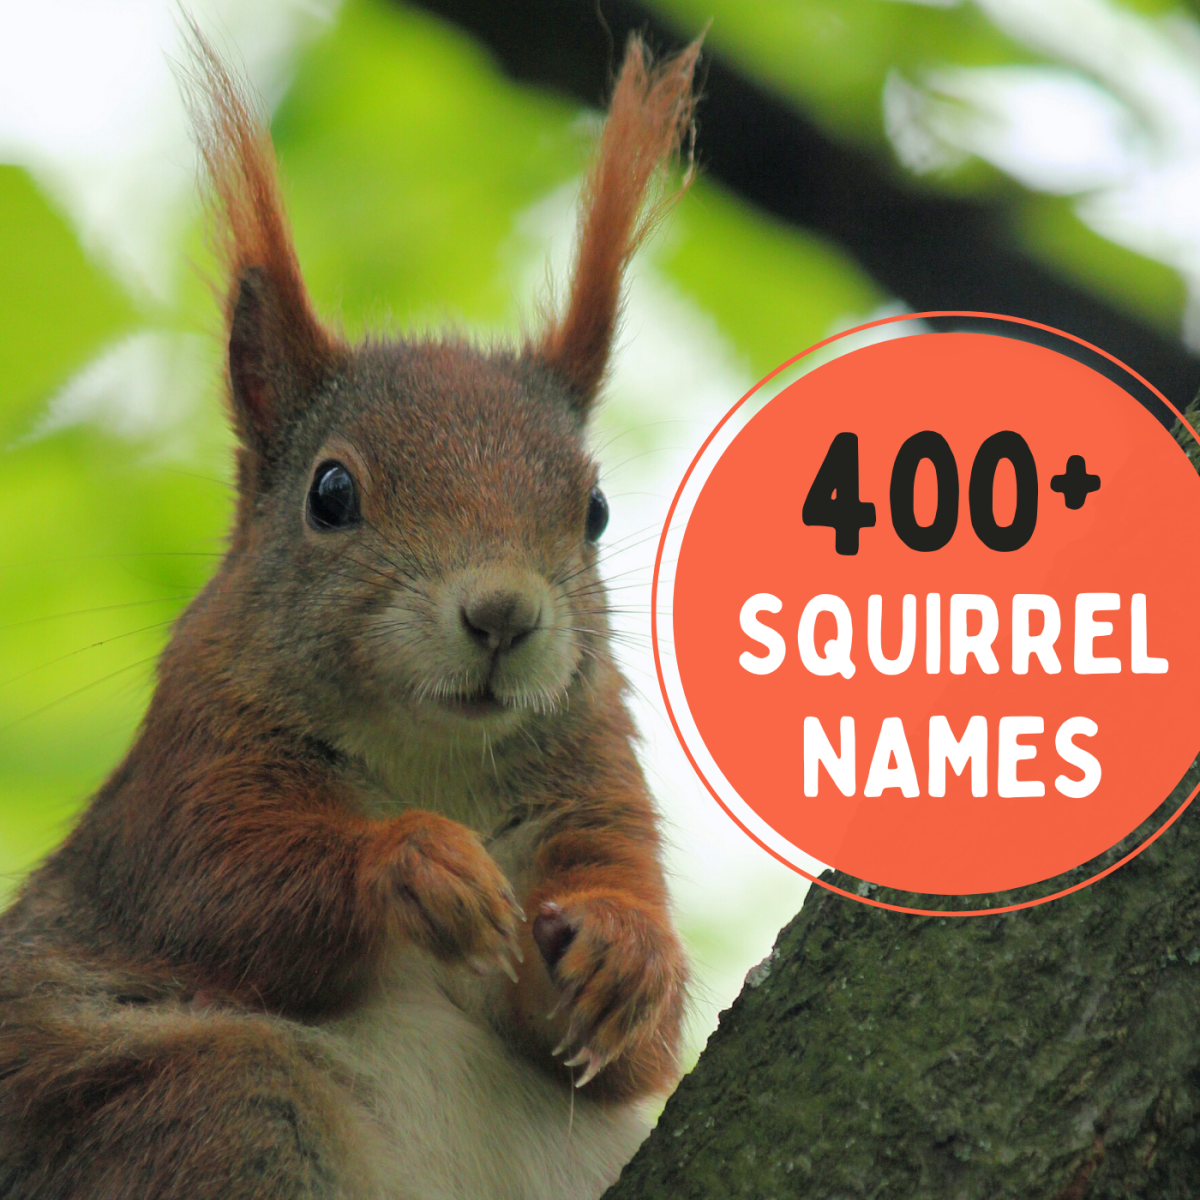 Do you have a pet squirrel, or have you just made friends with a squirrel in your backyard? Give it the perfect name!